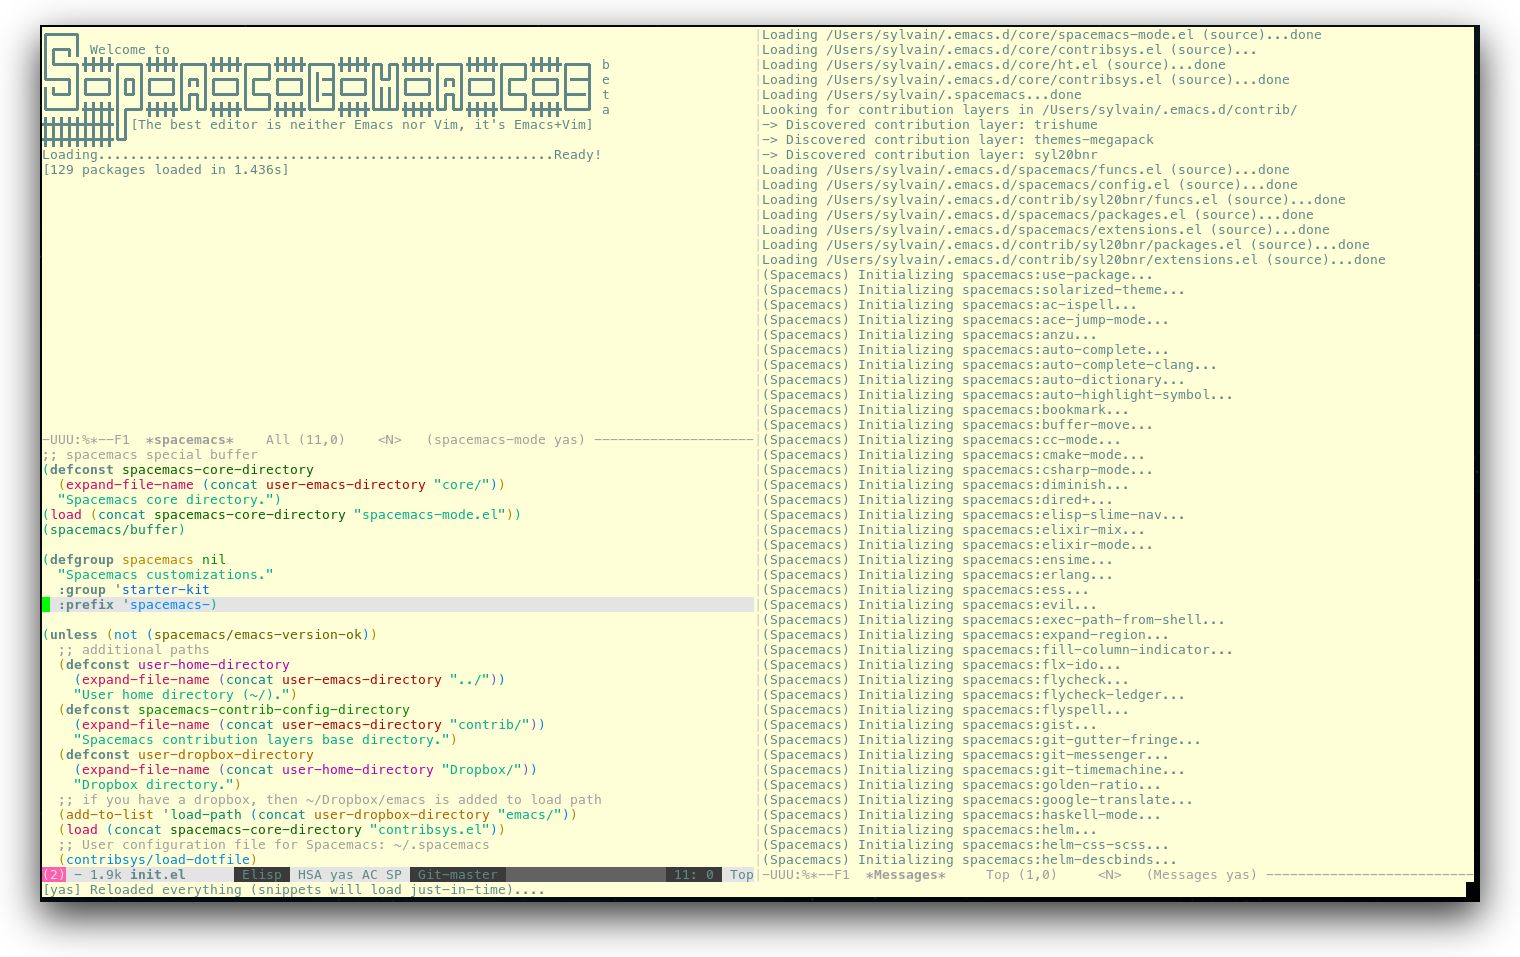 /TakeV/spacemacs/media/commit/8bf4f60e5afbd62ef6633fb70d02c8ddf7b1d12e/doc/img/spacemacs-urxvt.png